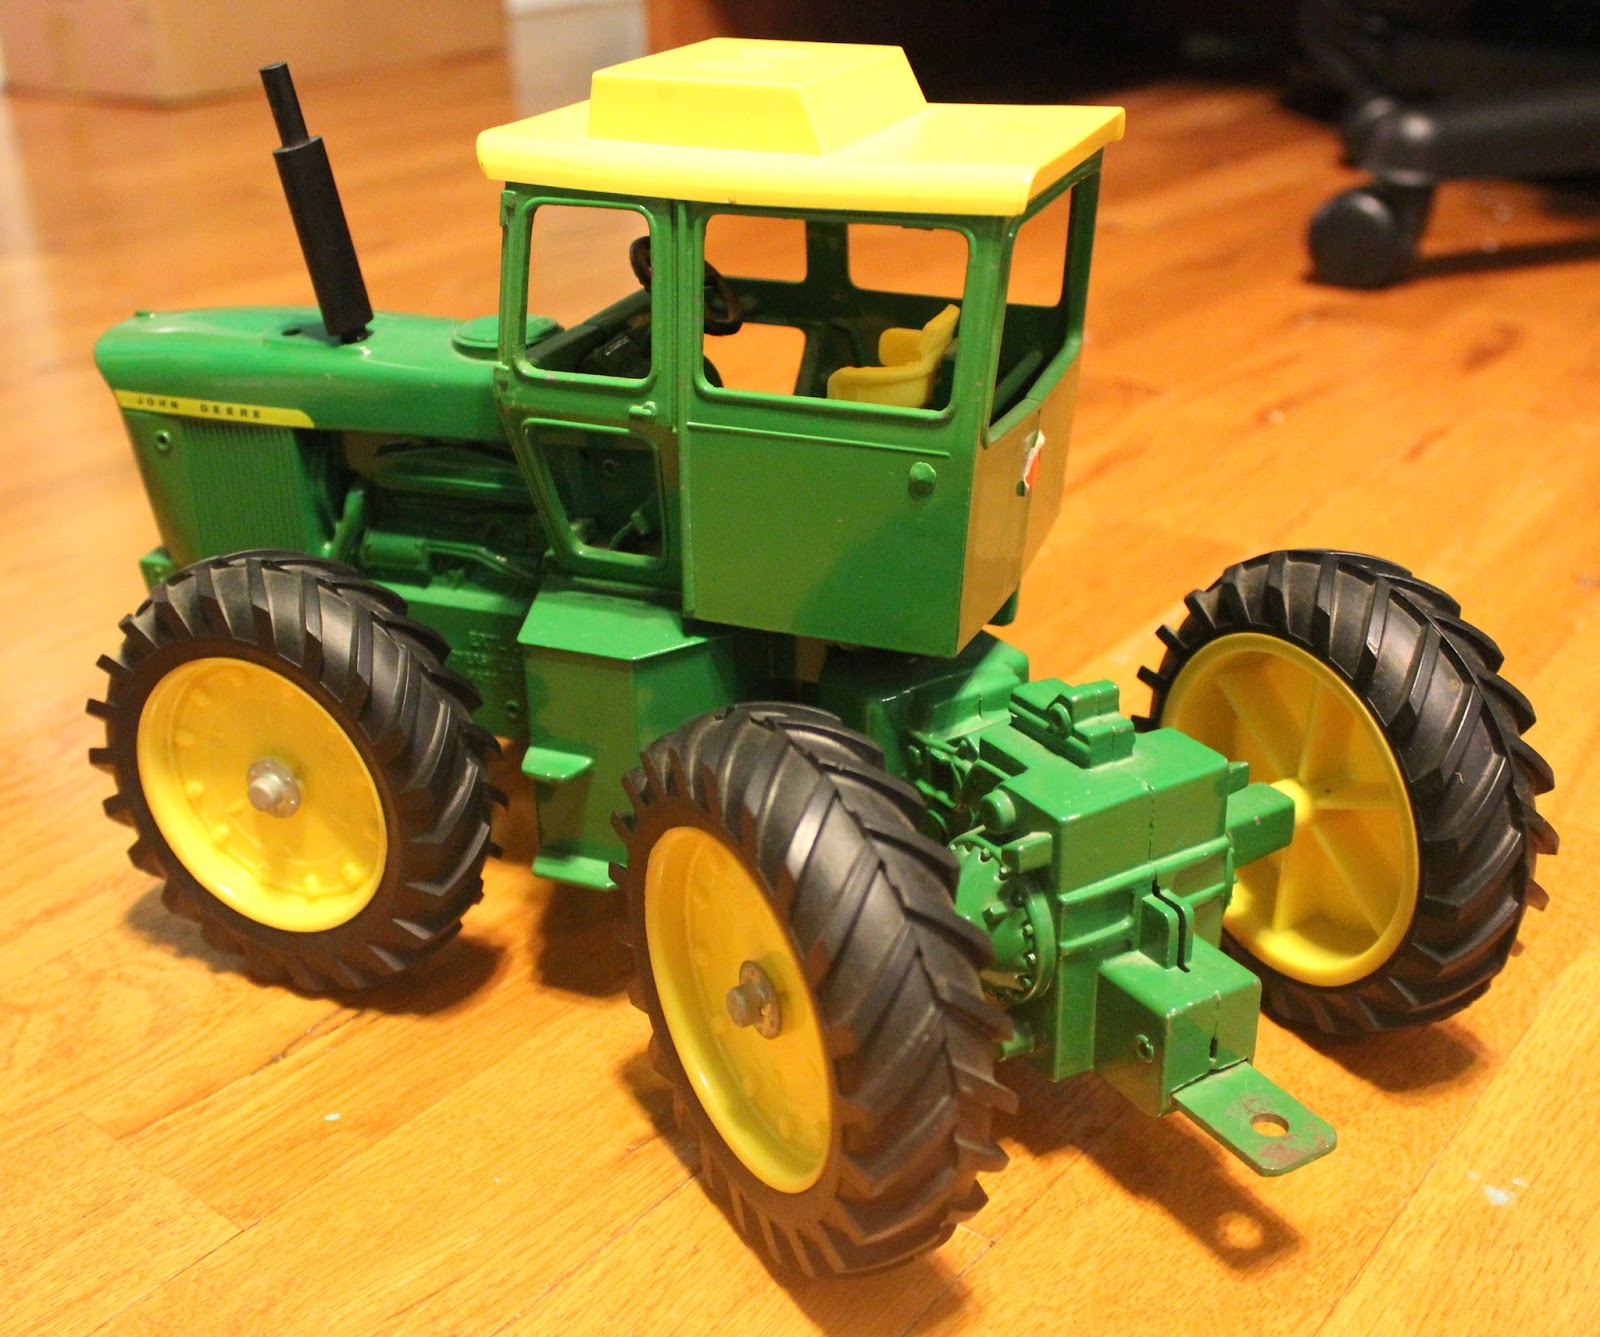 Spoelman Family Toy Tractor Collection Vintage John Deere 7520 4WD Tractor